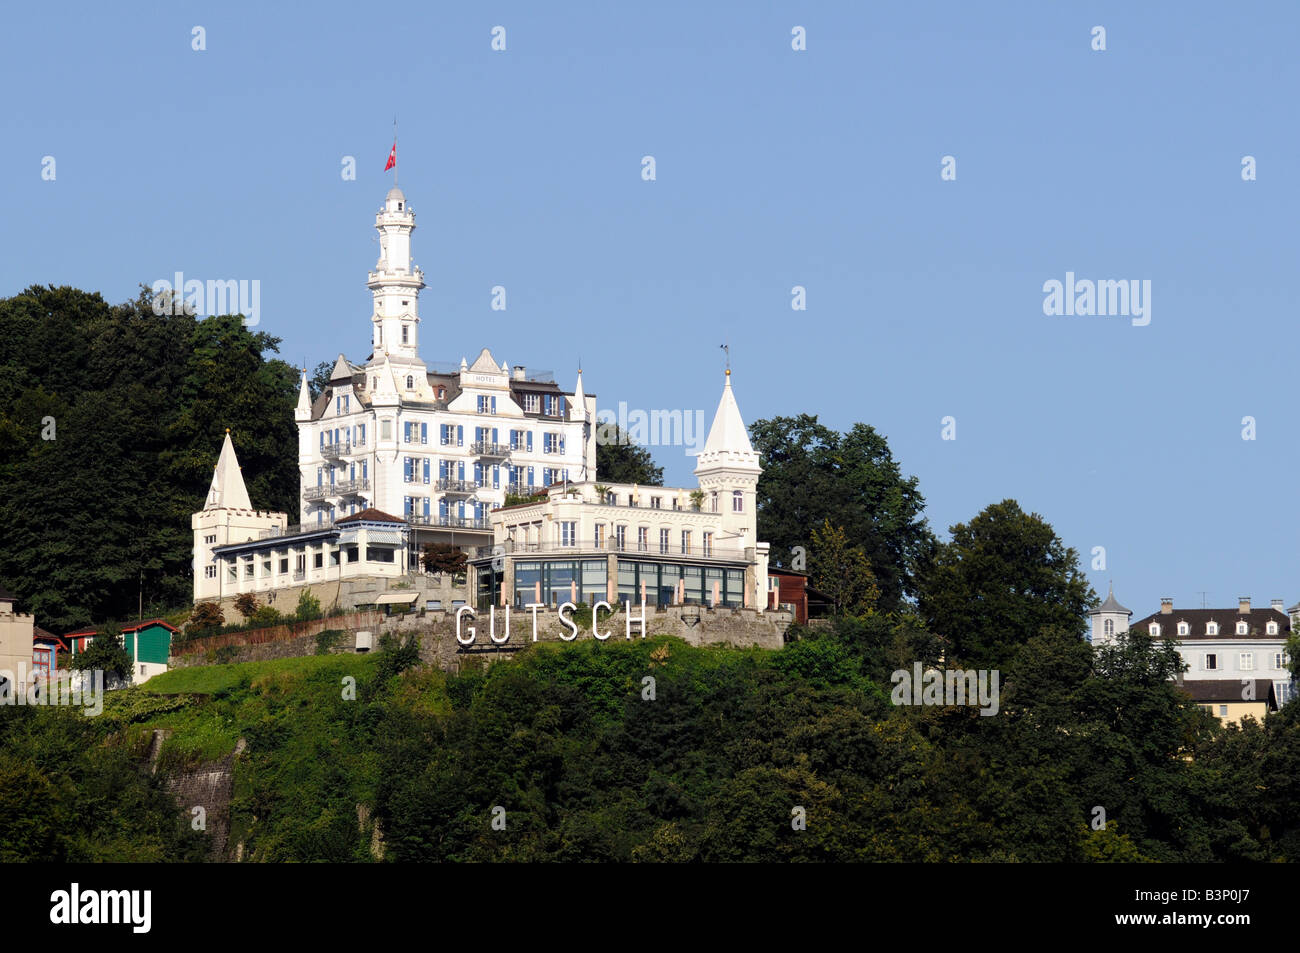 The Chateau Gutsch, a luxury hotel and architectural wonder in Lucerne, central Switzerland. Stock Photo